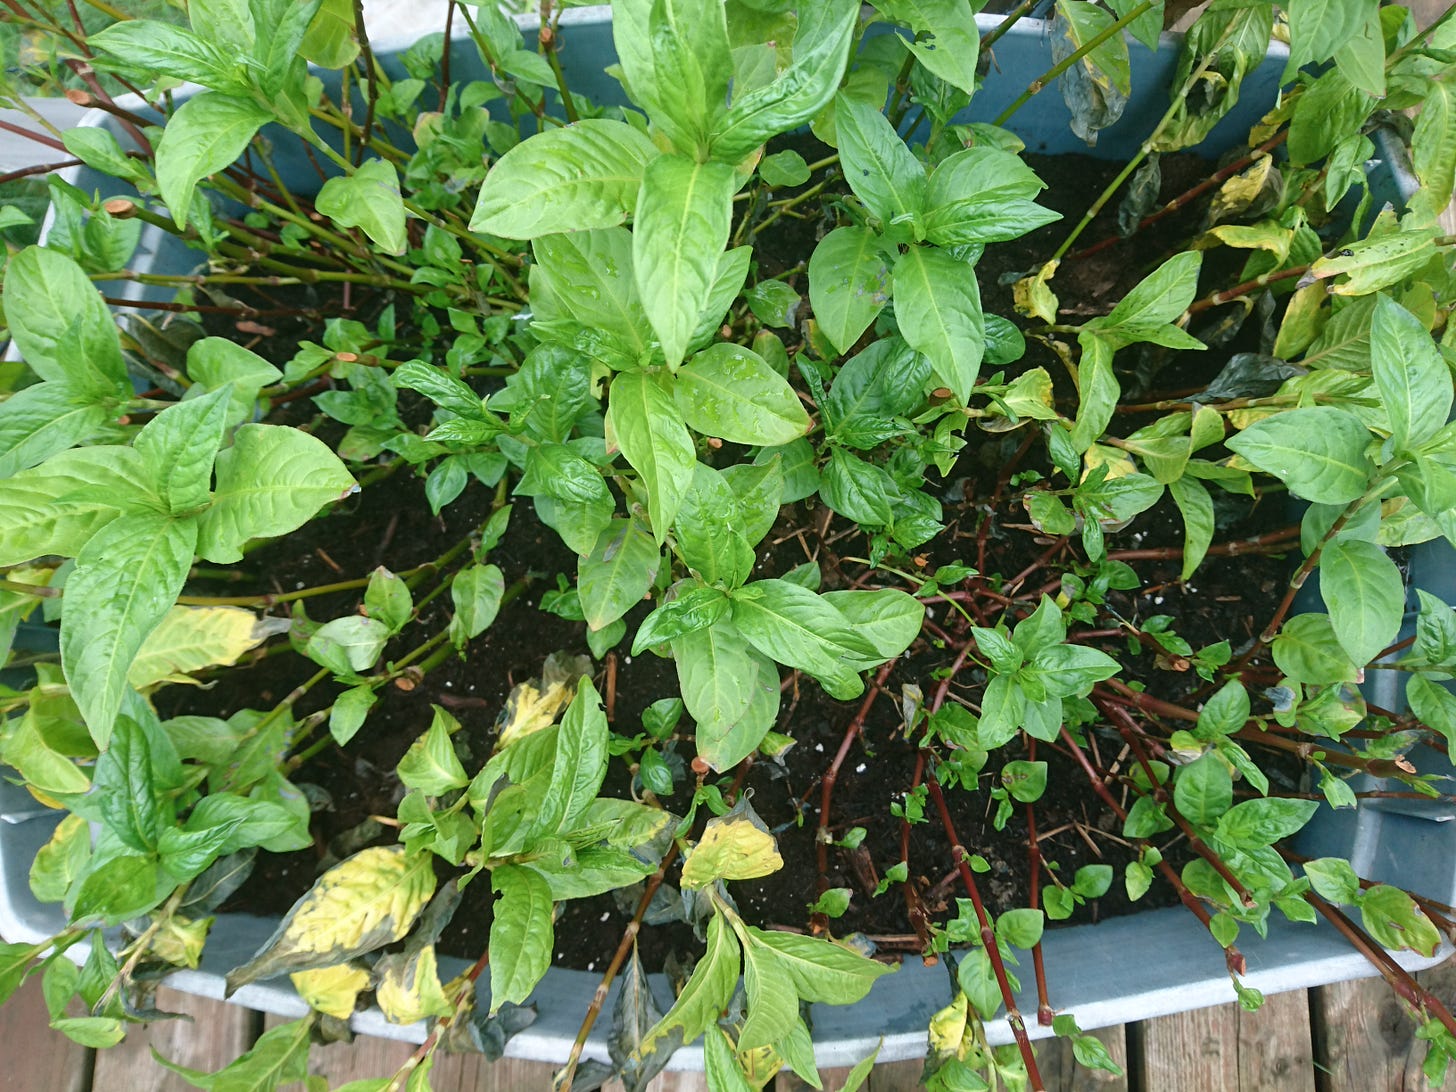 A variety of large and small indigo leaves. Larger ones are more yellow, and smallers ones are a darker green. The red stems and dark soil in the bucket below can be seen because of the lowered density of leaves